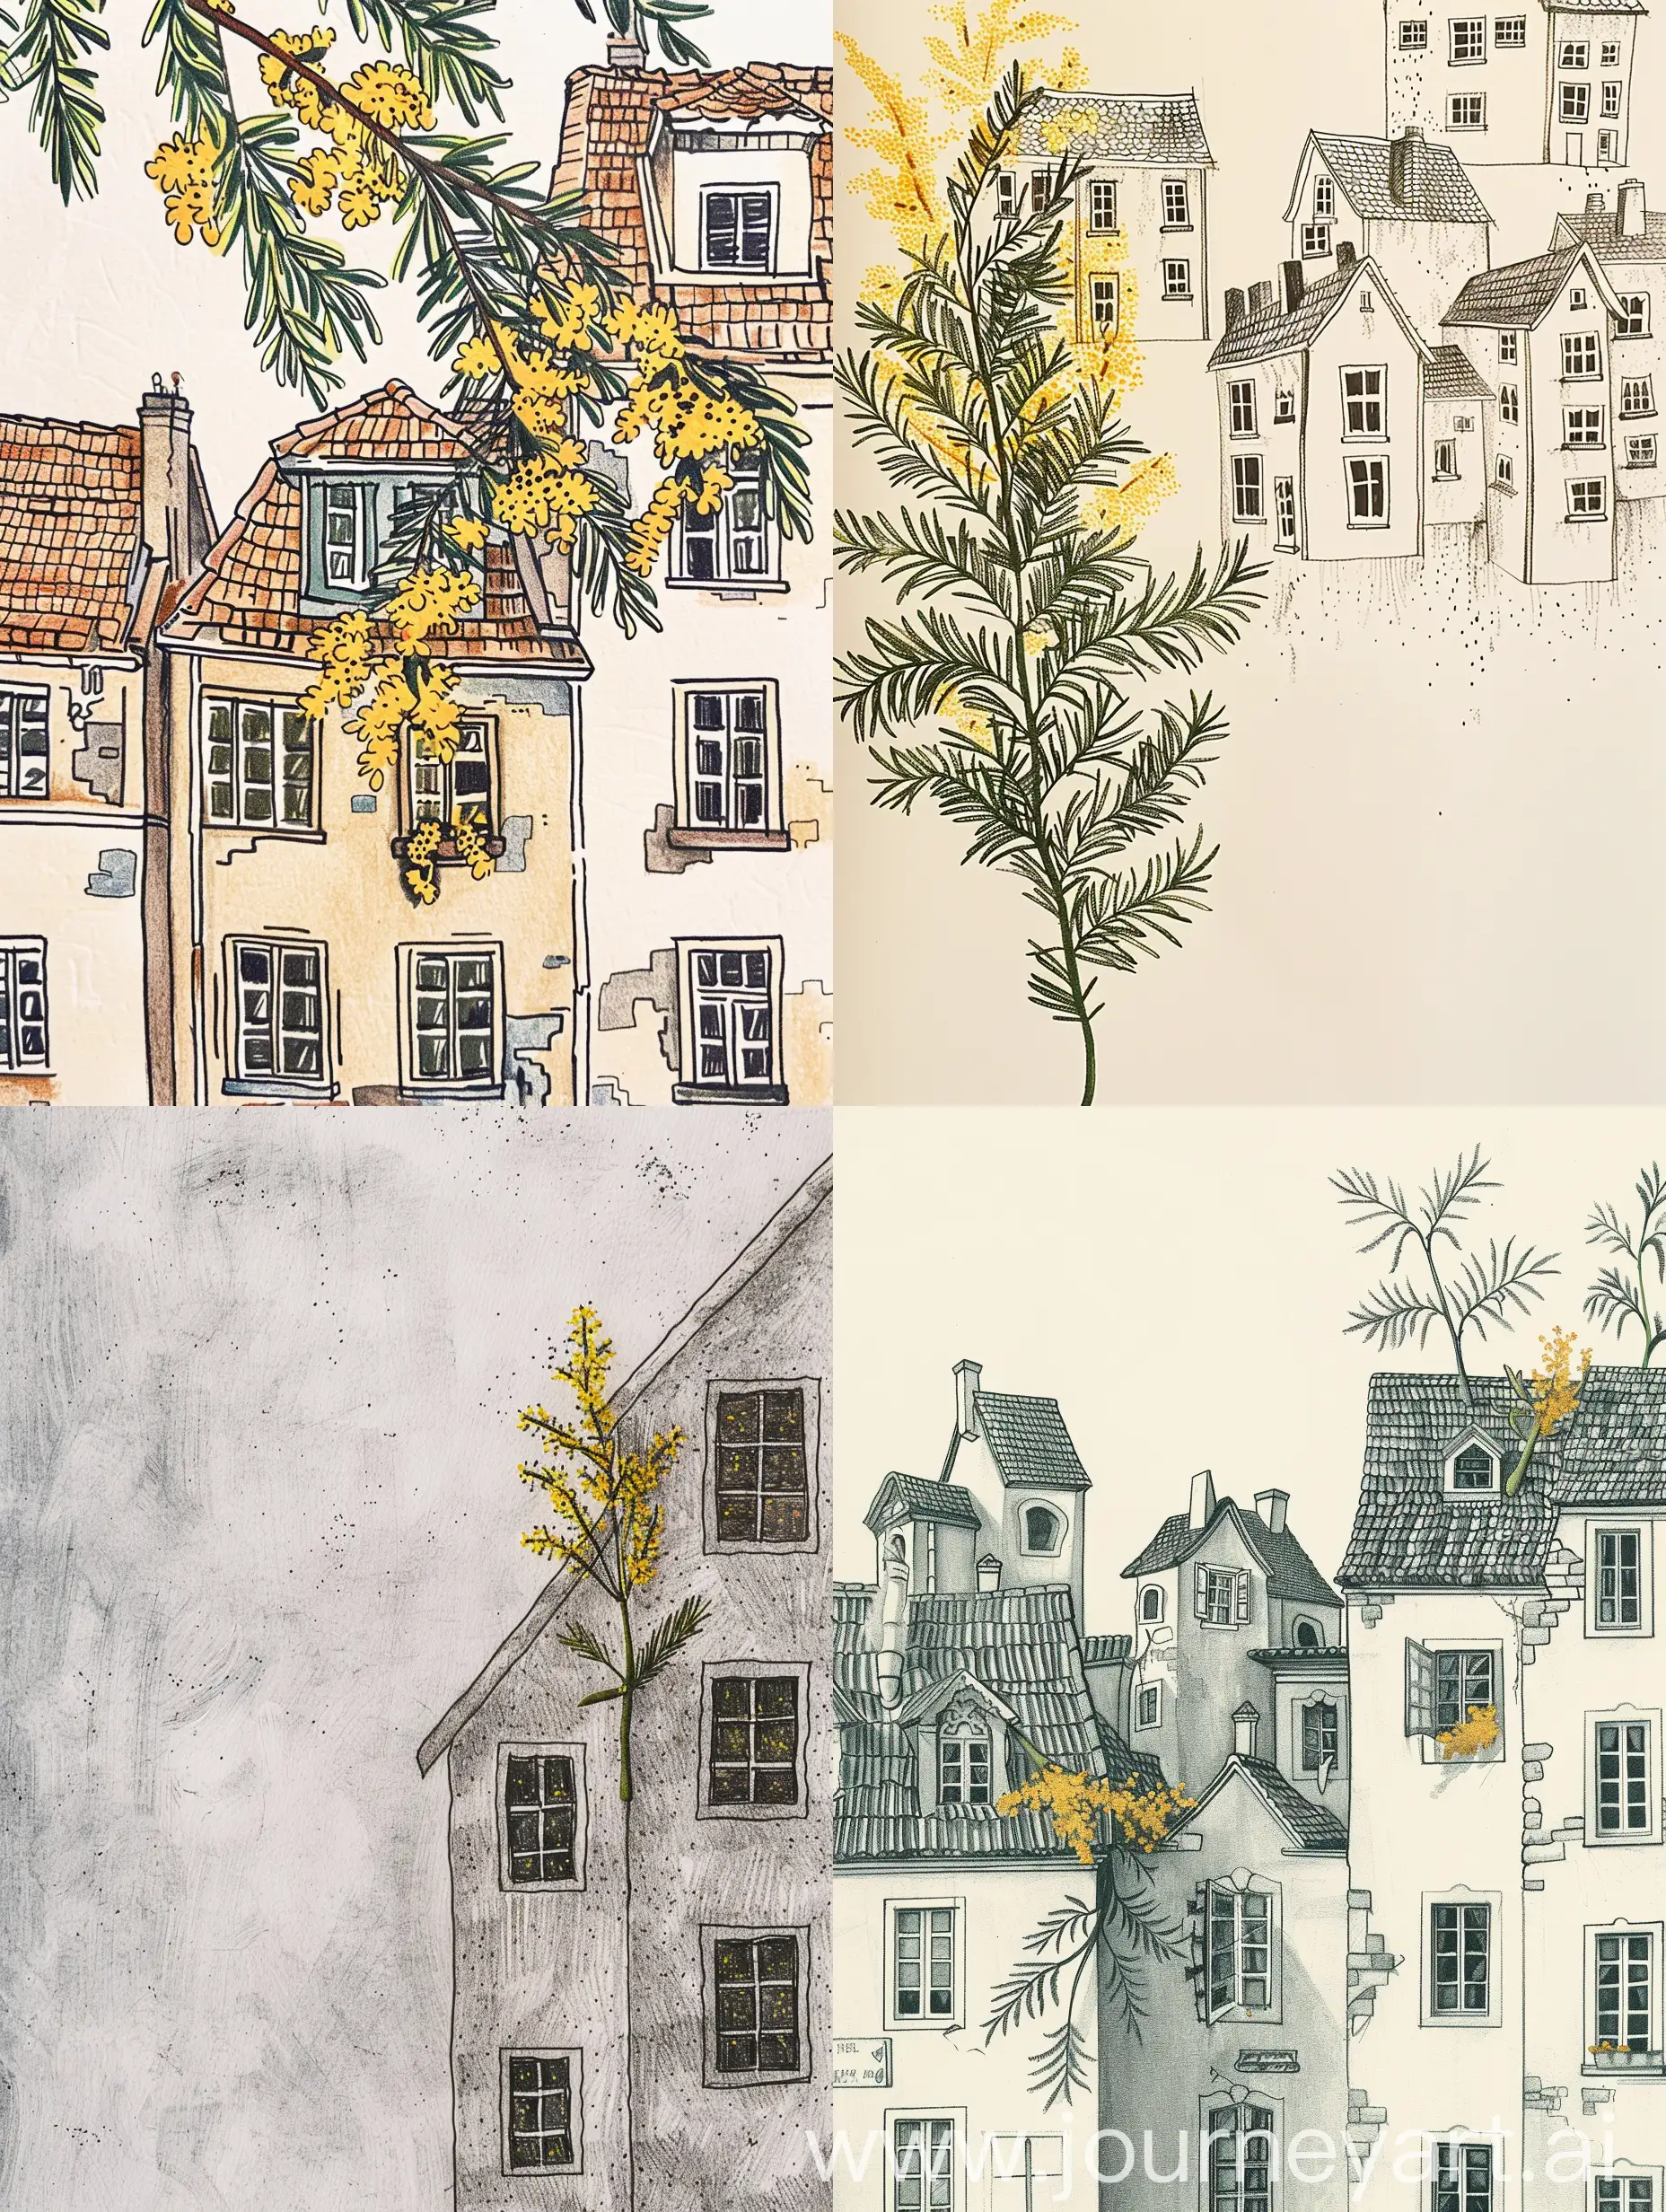 Artist-Sketching-Miniature-Houses-with-Mimosa-Sprig-in-Window